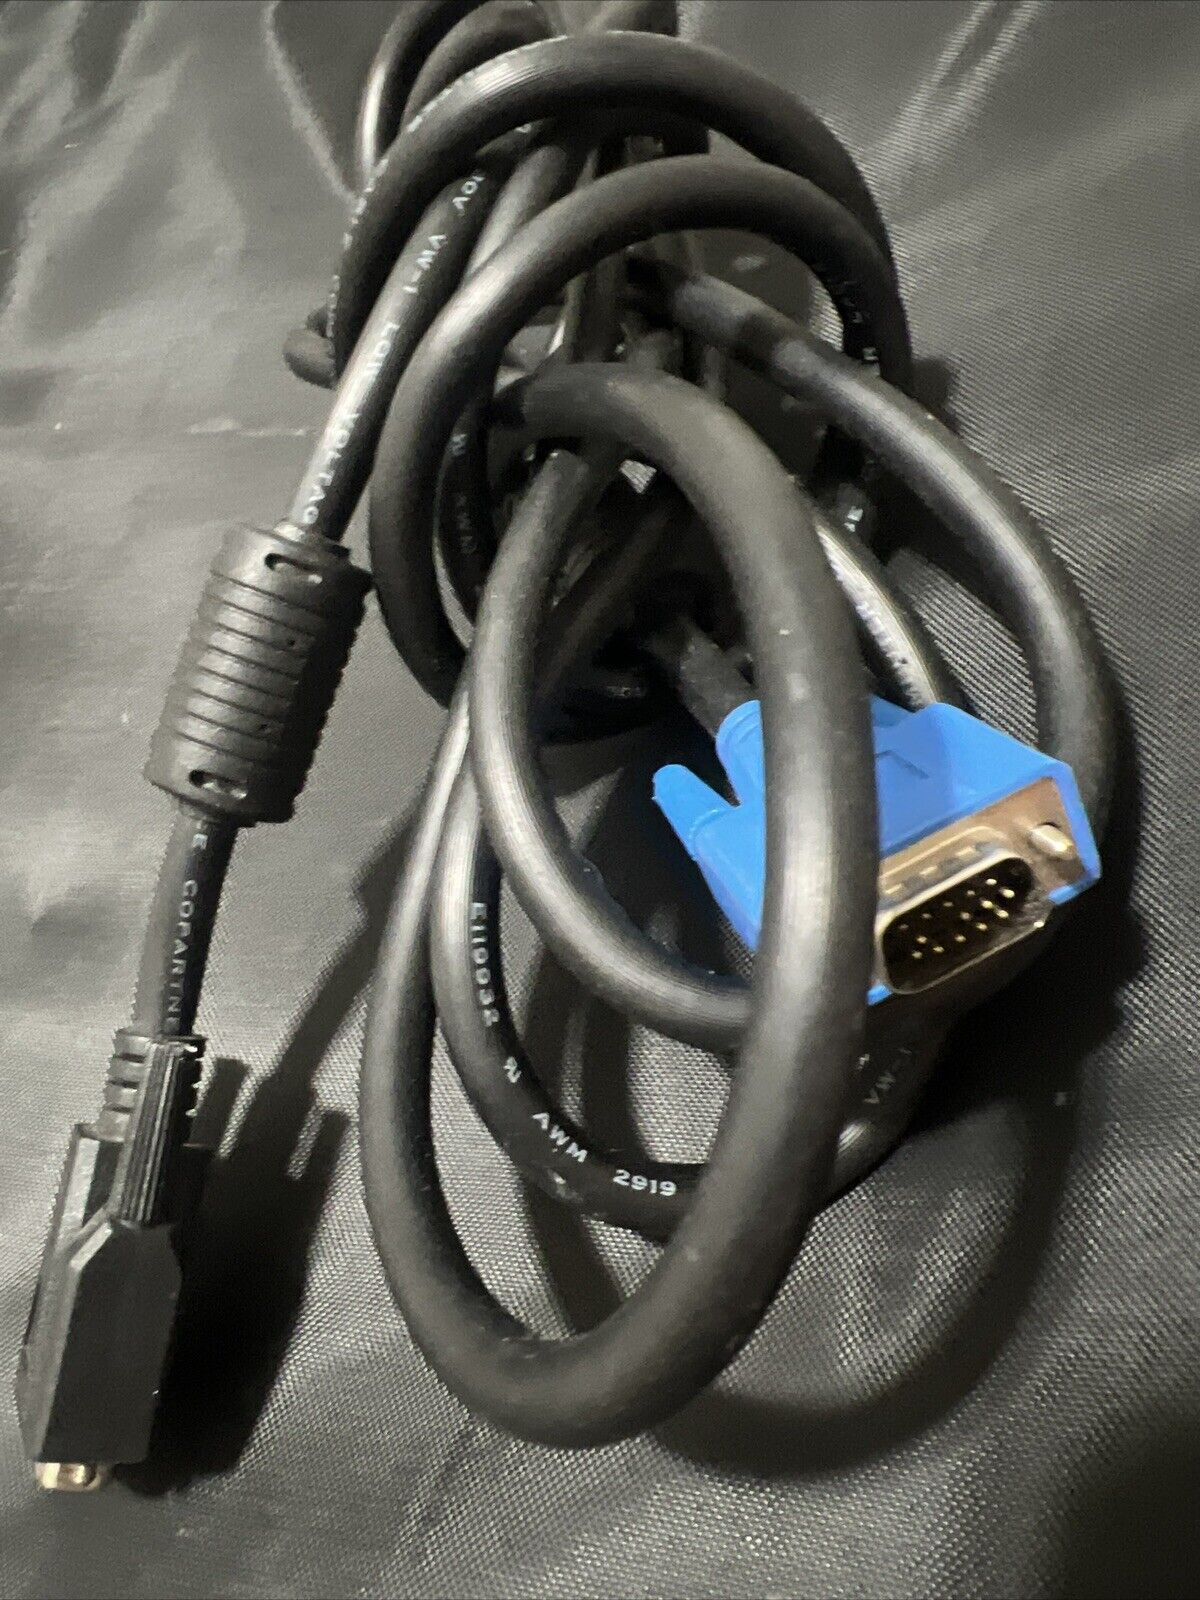 1-COPARTNER COMPUTER CABLE E119932-U AWM 2919 10 FT LONG MALE To MALE